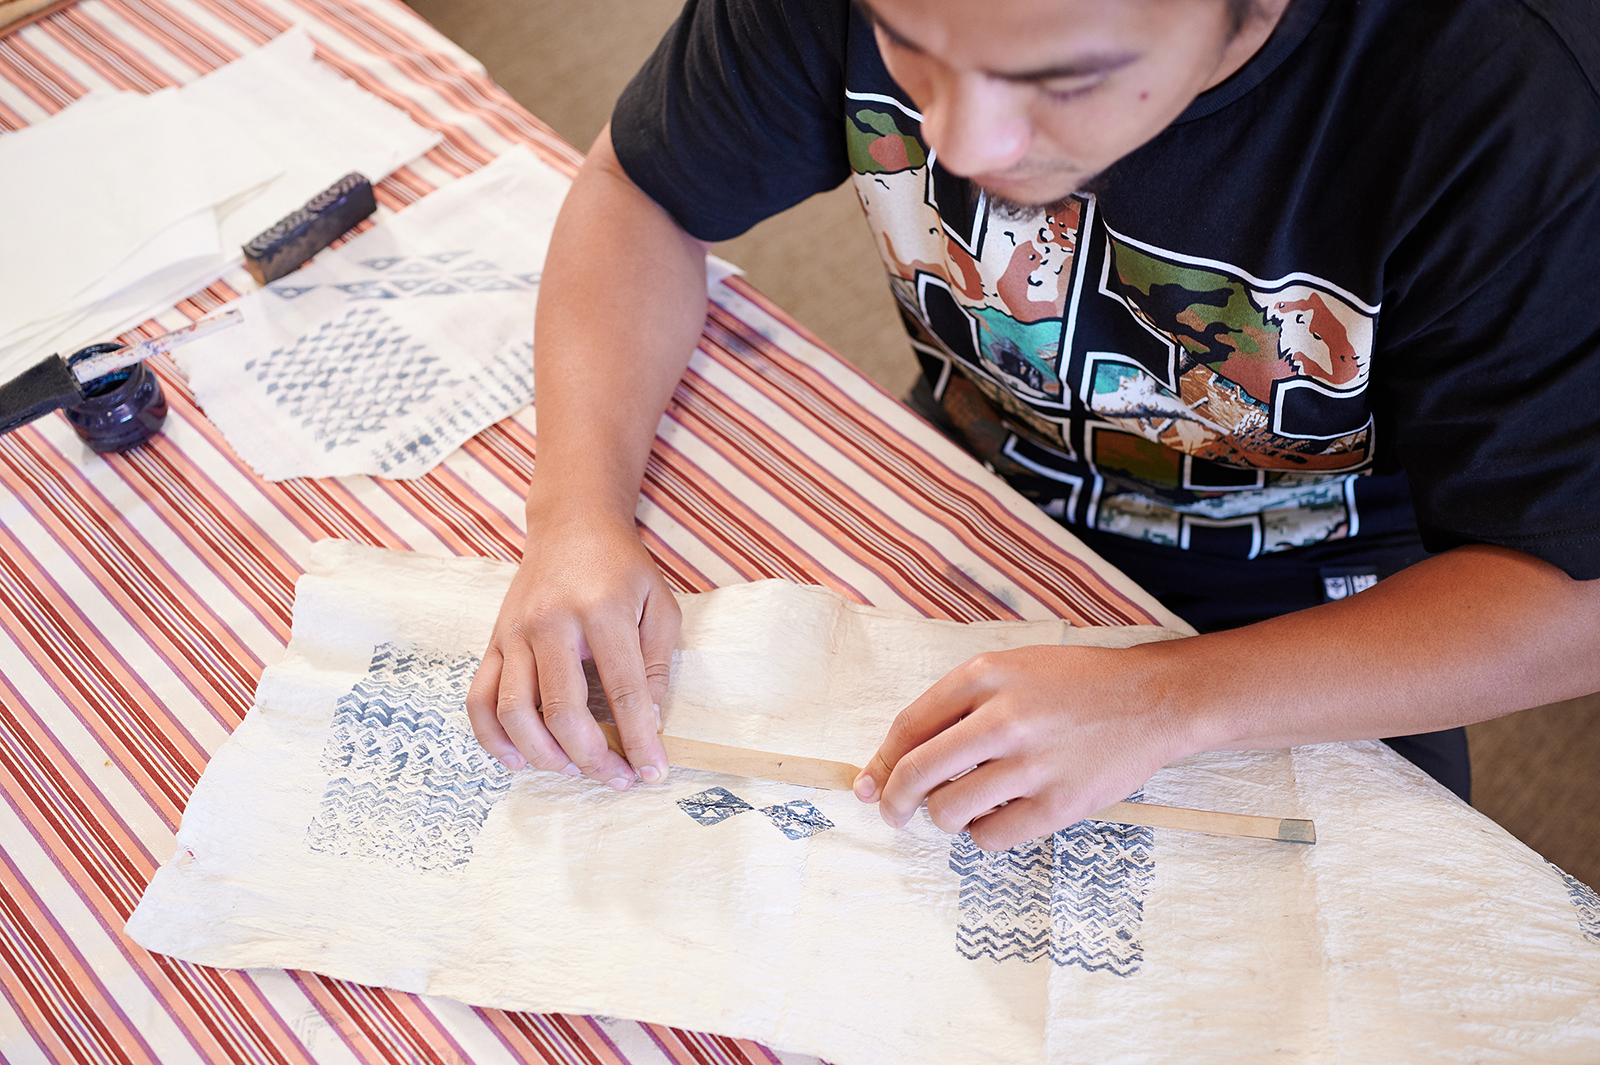 Person stamping geometric patterns on a cloth.